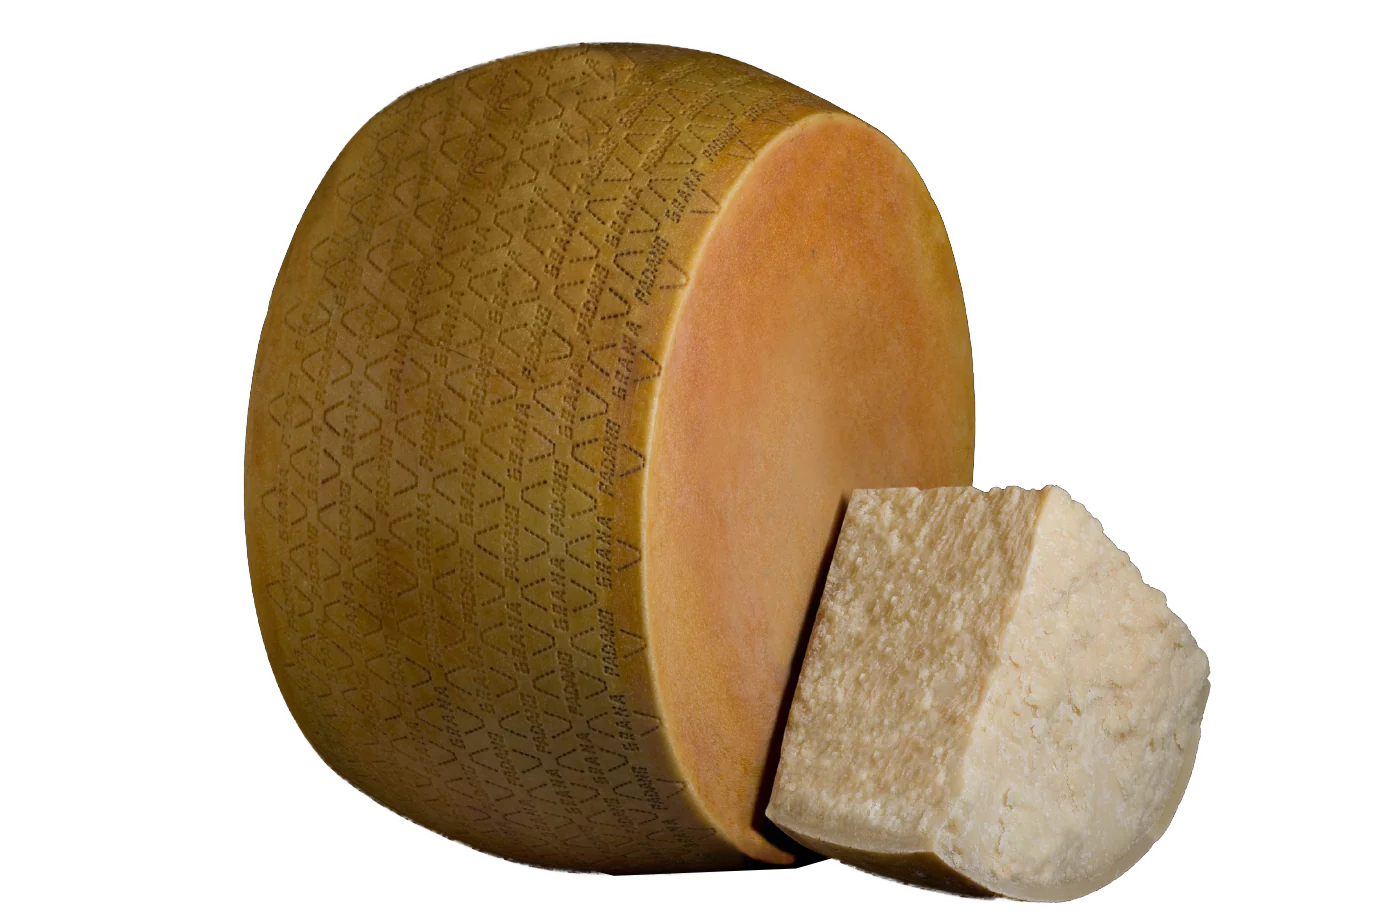 IFCFOOD - Grana Padano cheese, aged for 10 months, gluten-free. 100gr.